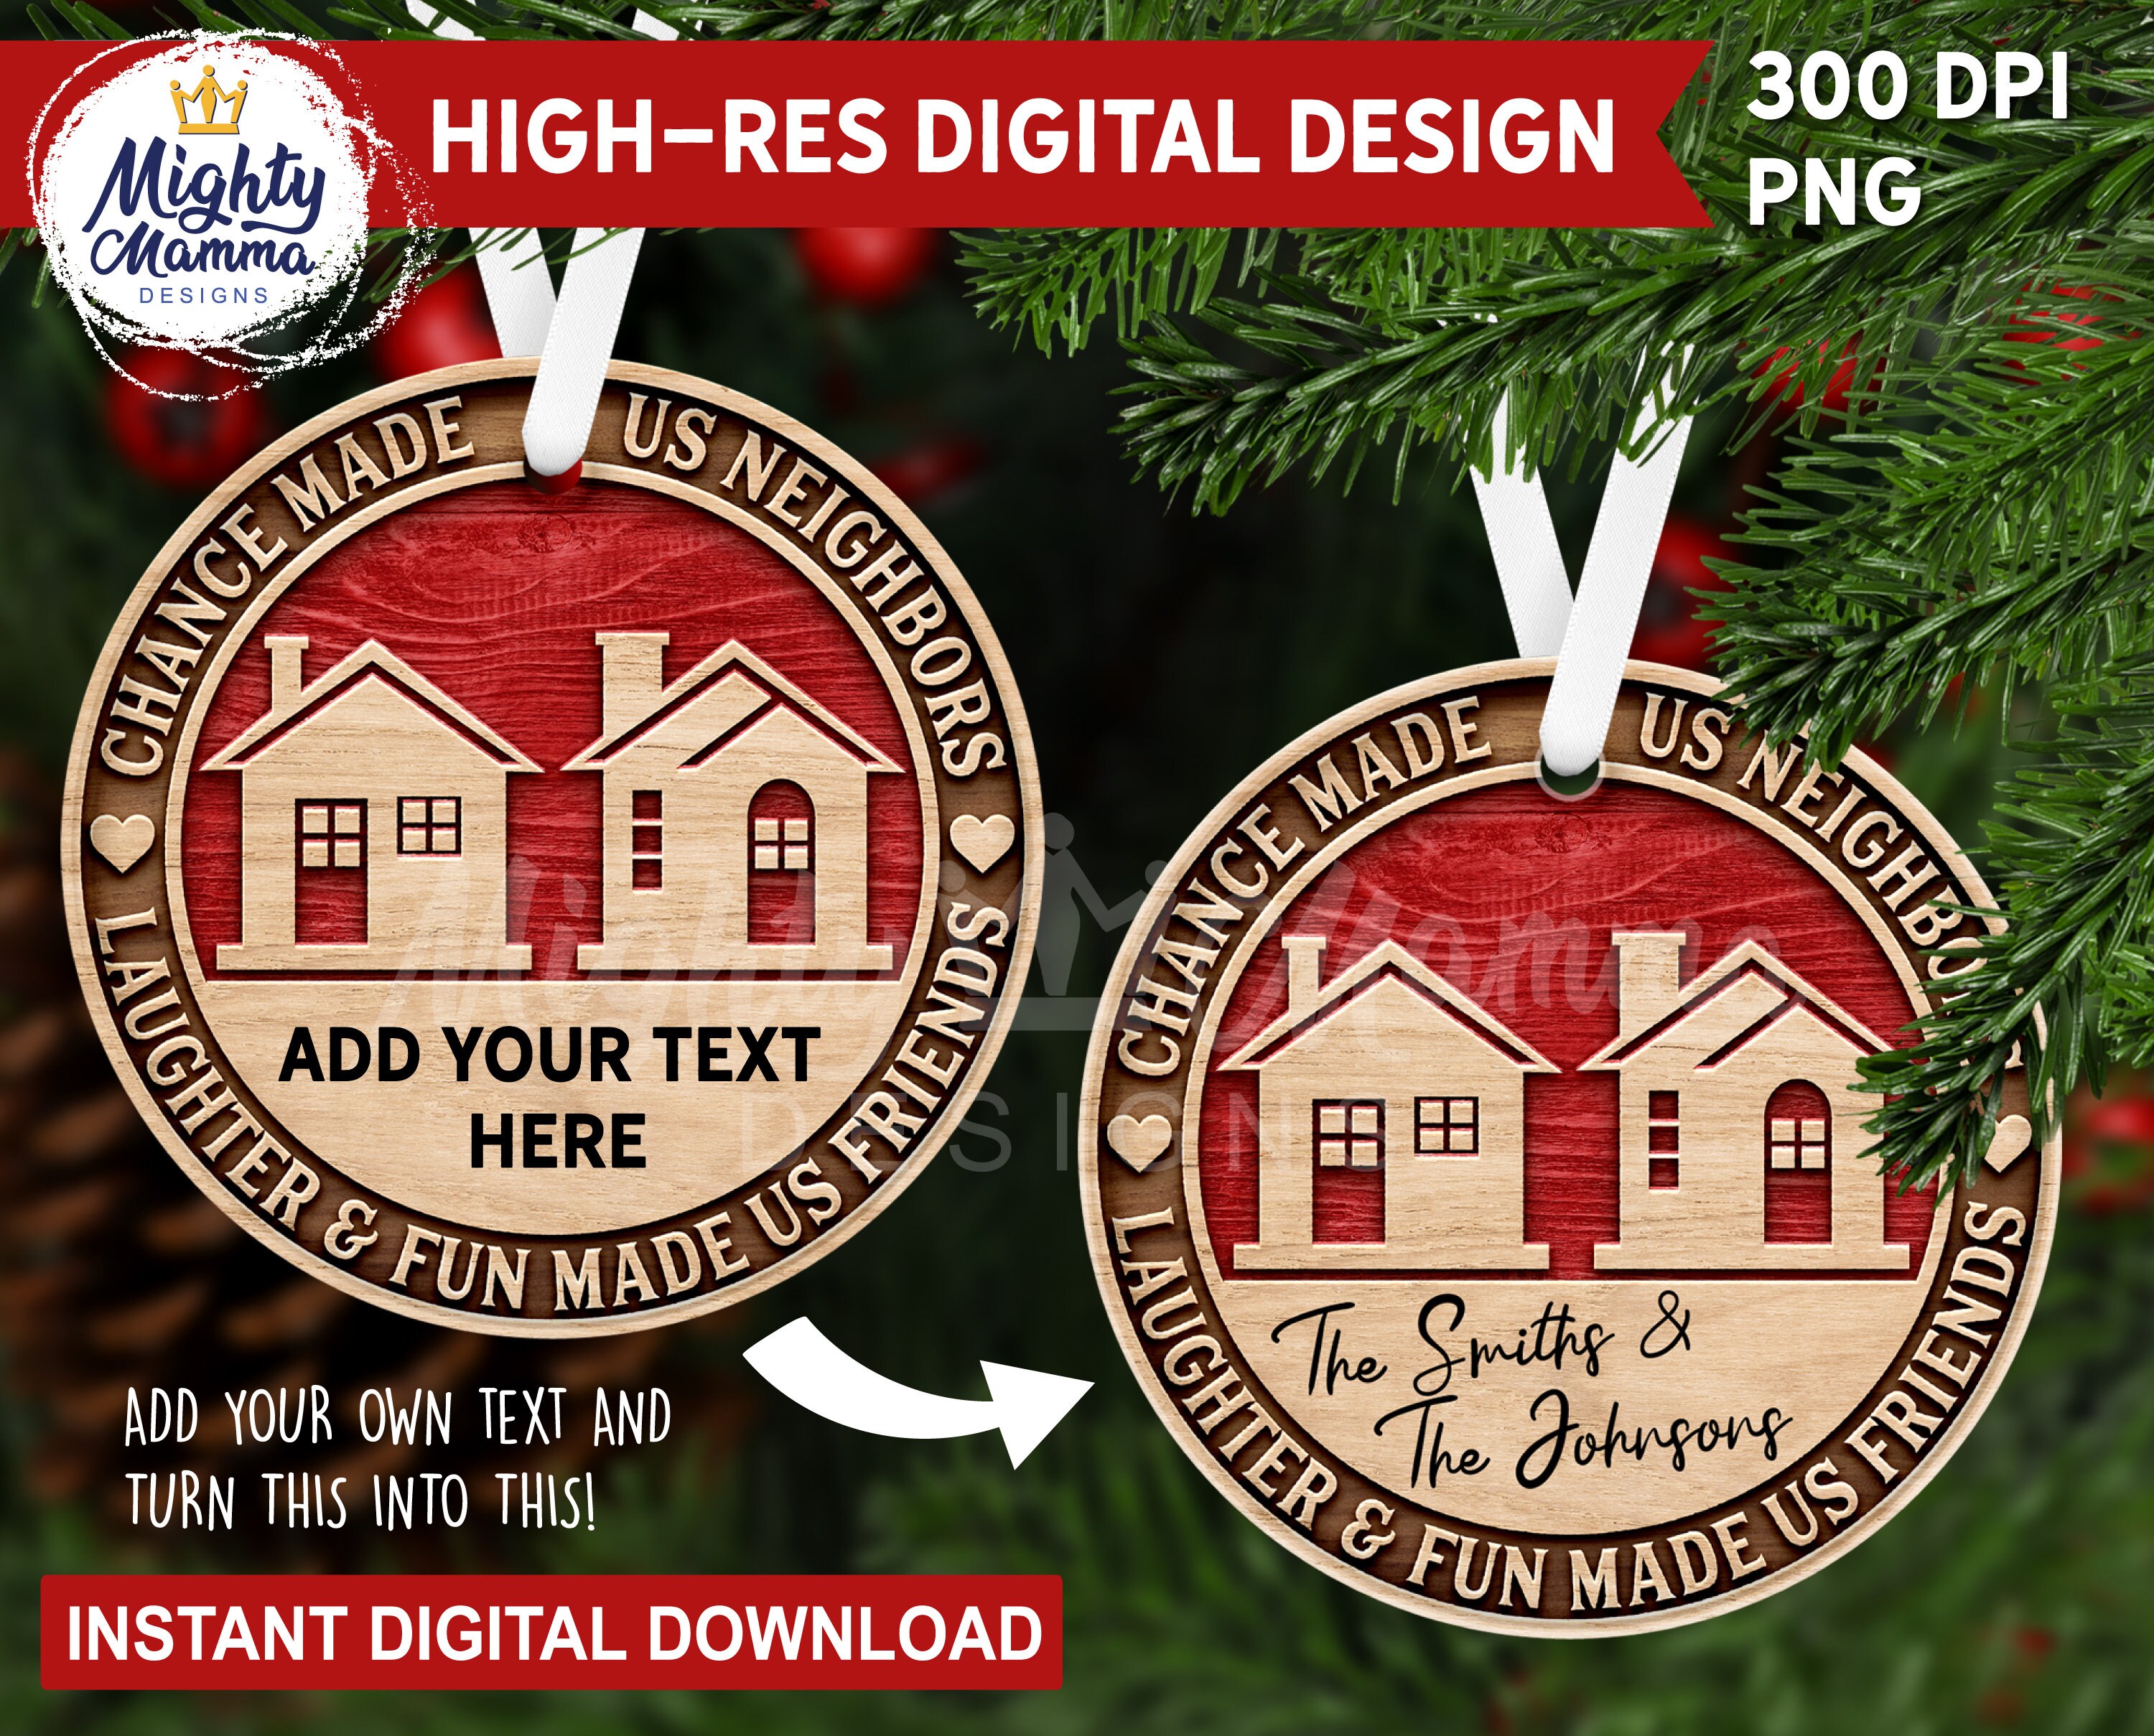 Chance made us neighbors Ornament – Digital File – Embroidery